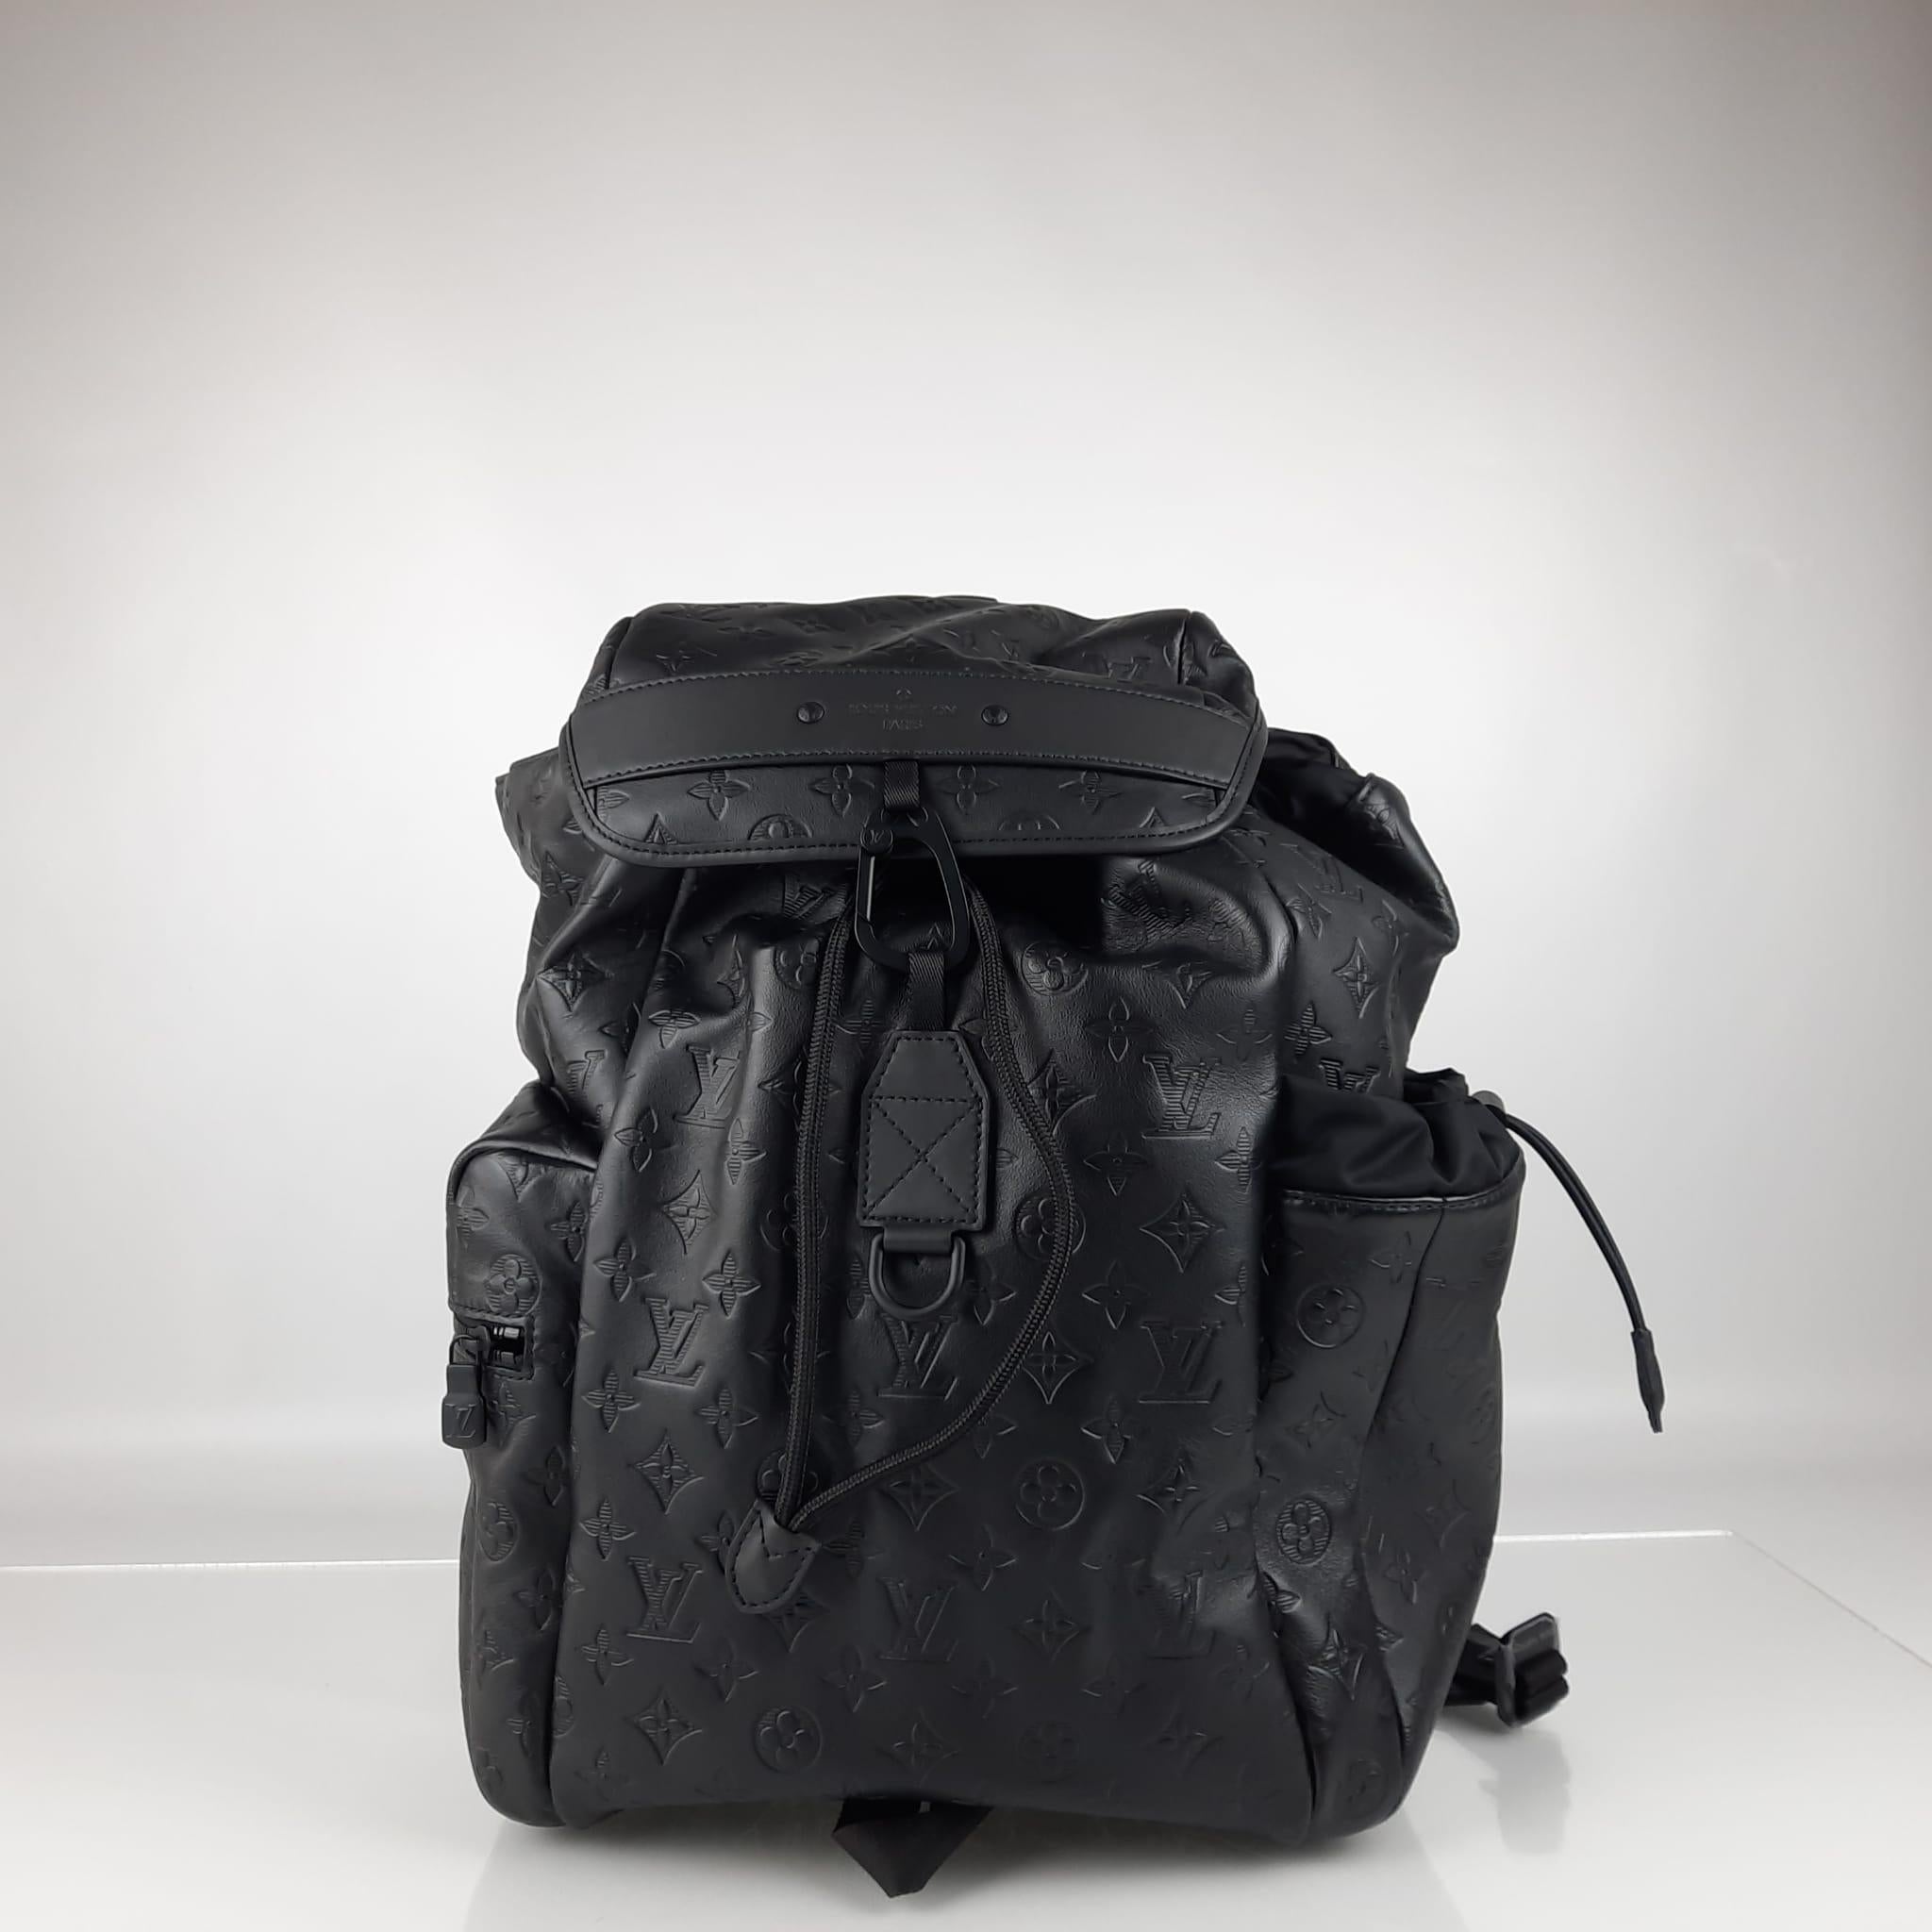 This backpack is equipped with comfortable leather straps and a top handle for different carry styles. Outside: 1 zipped pocket and 1 open pocket. Inside: zipped pocket and double pocket. Handle: single.
